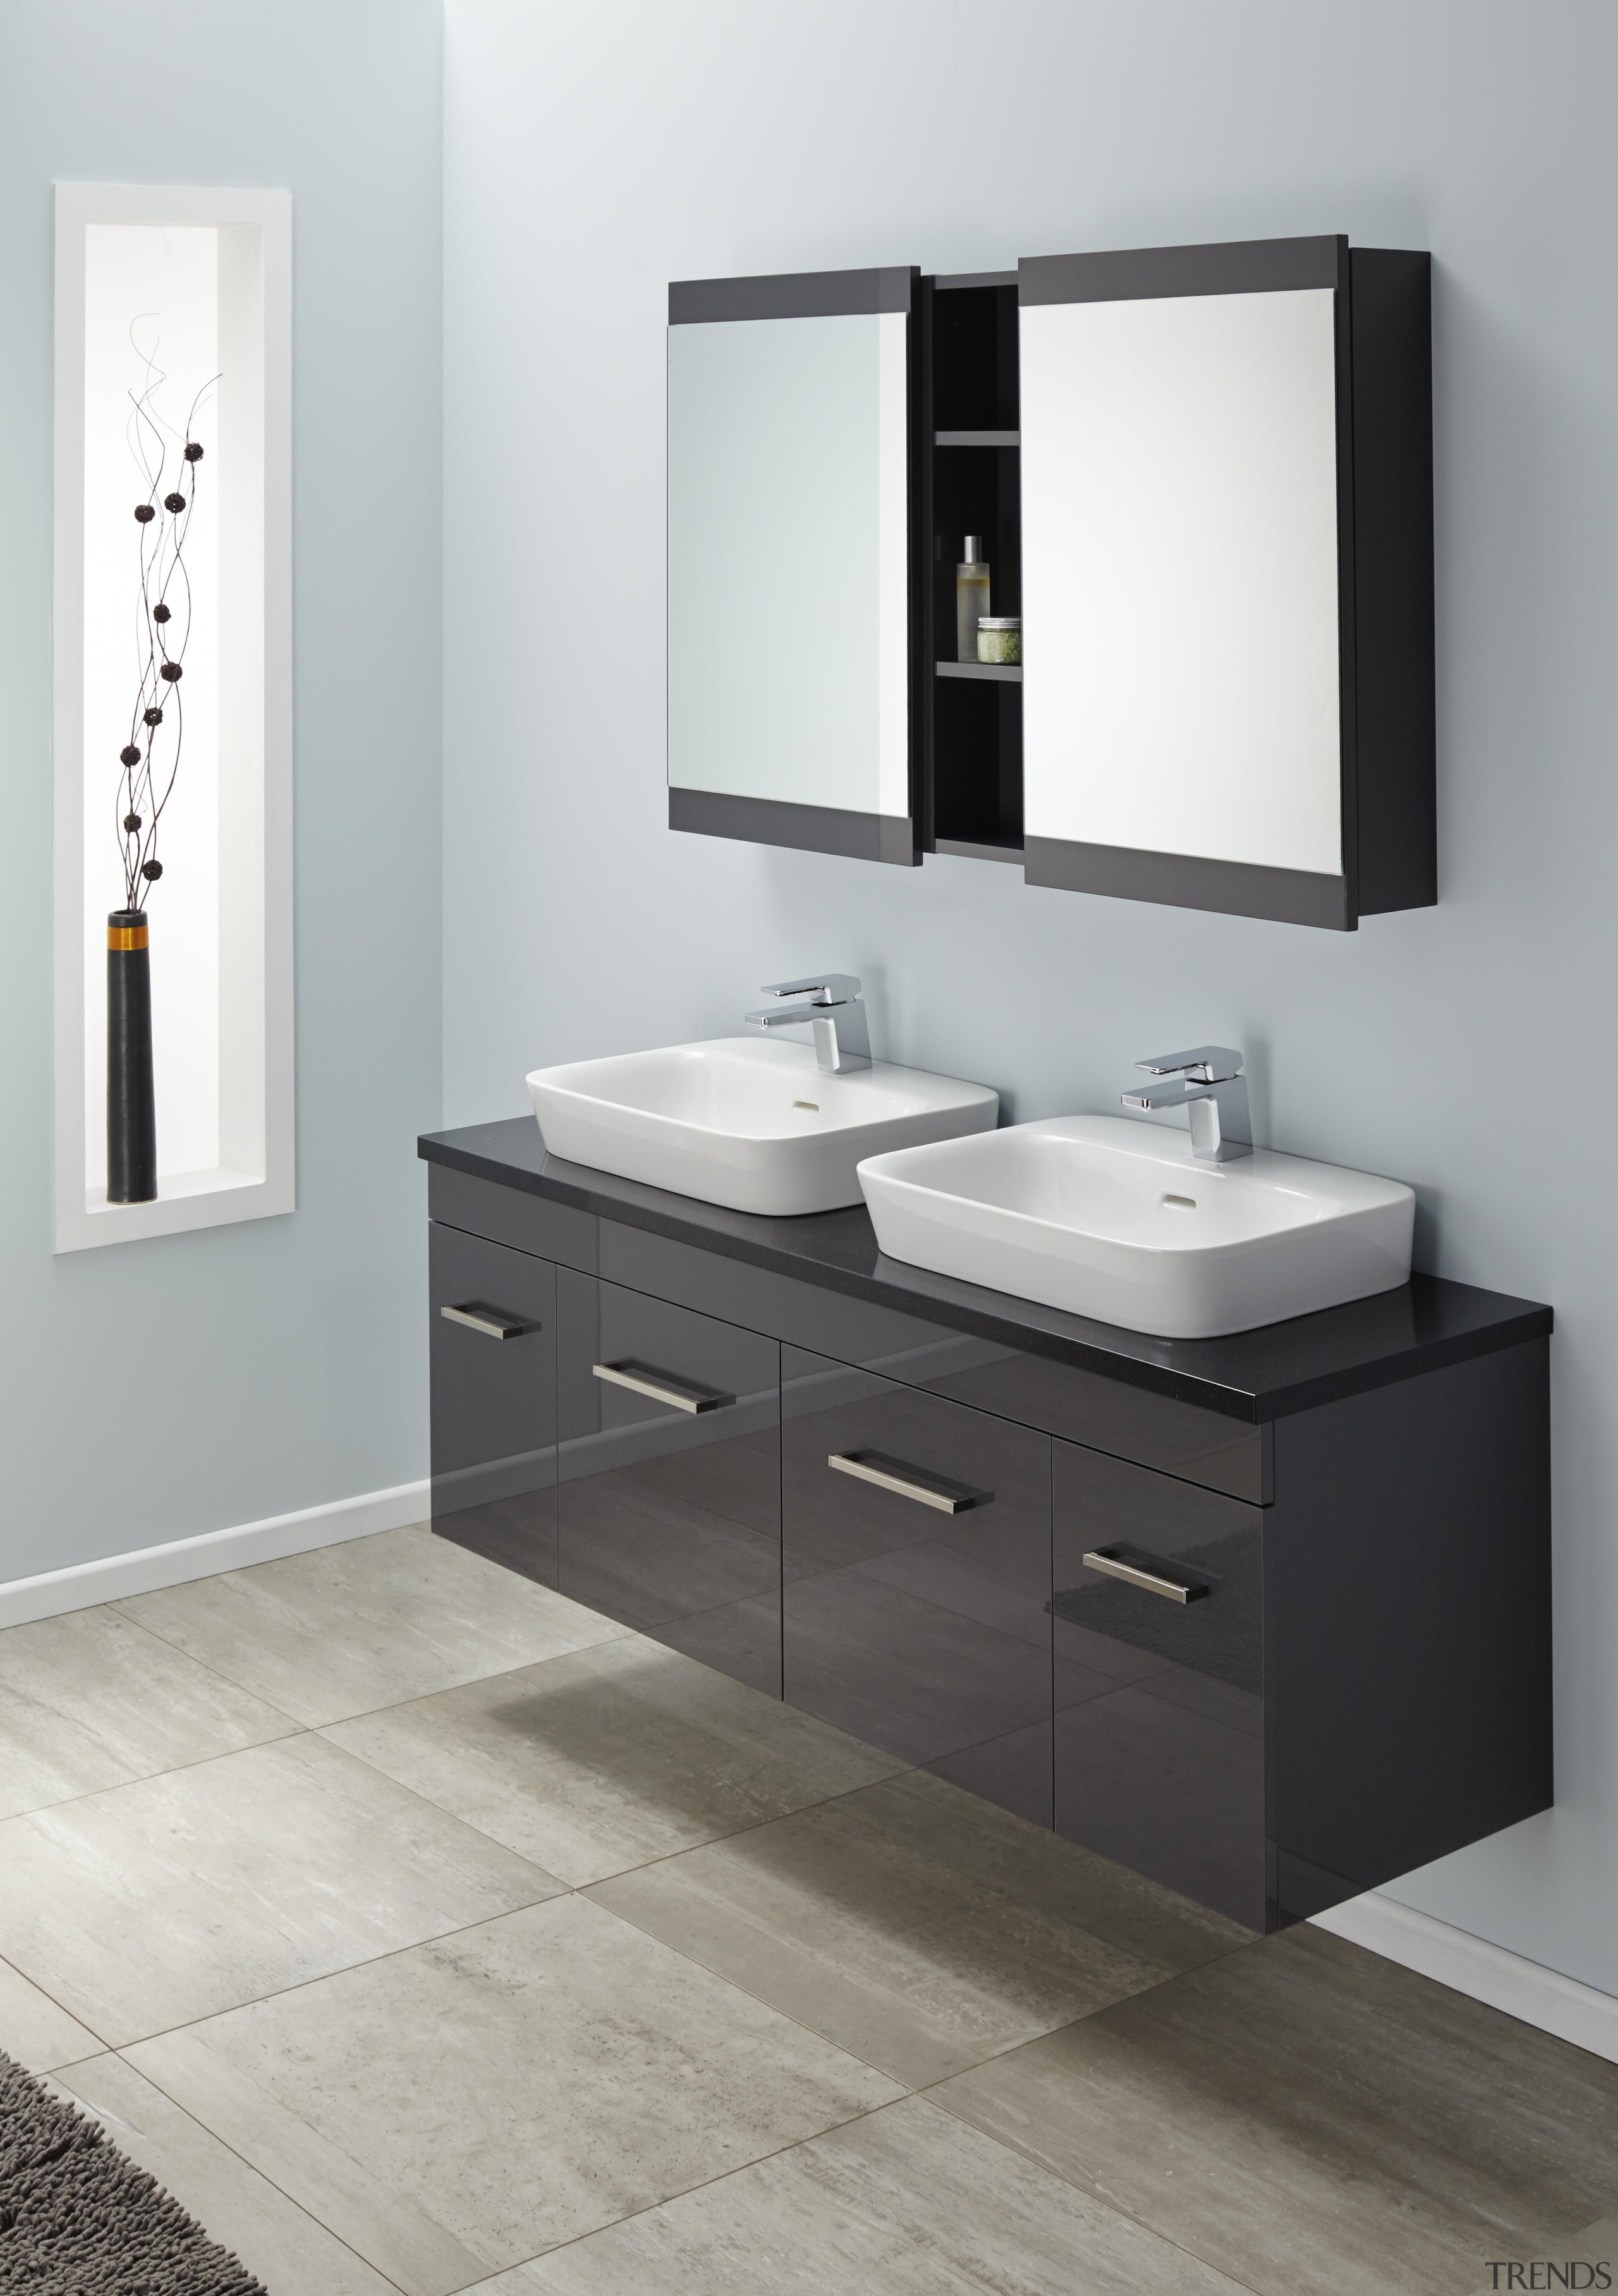 Express your style by pairing the natural beauty bathroom, bathroom accessory, bathroom cabinet, bathroom sink, plumbing fixture, product, product design, sink, tap, gray